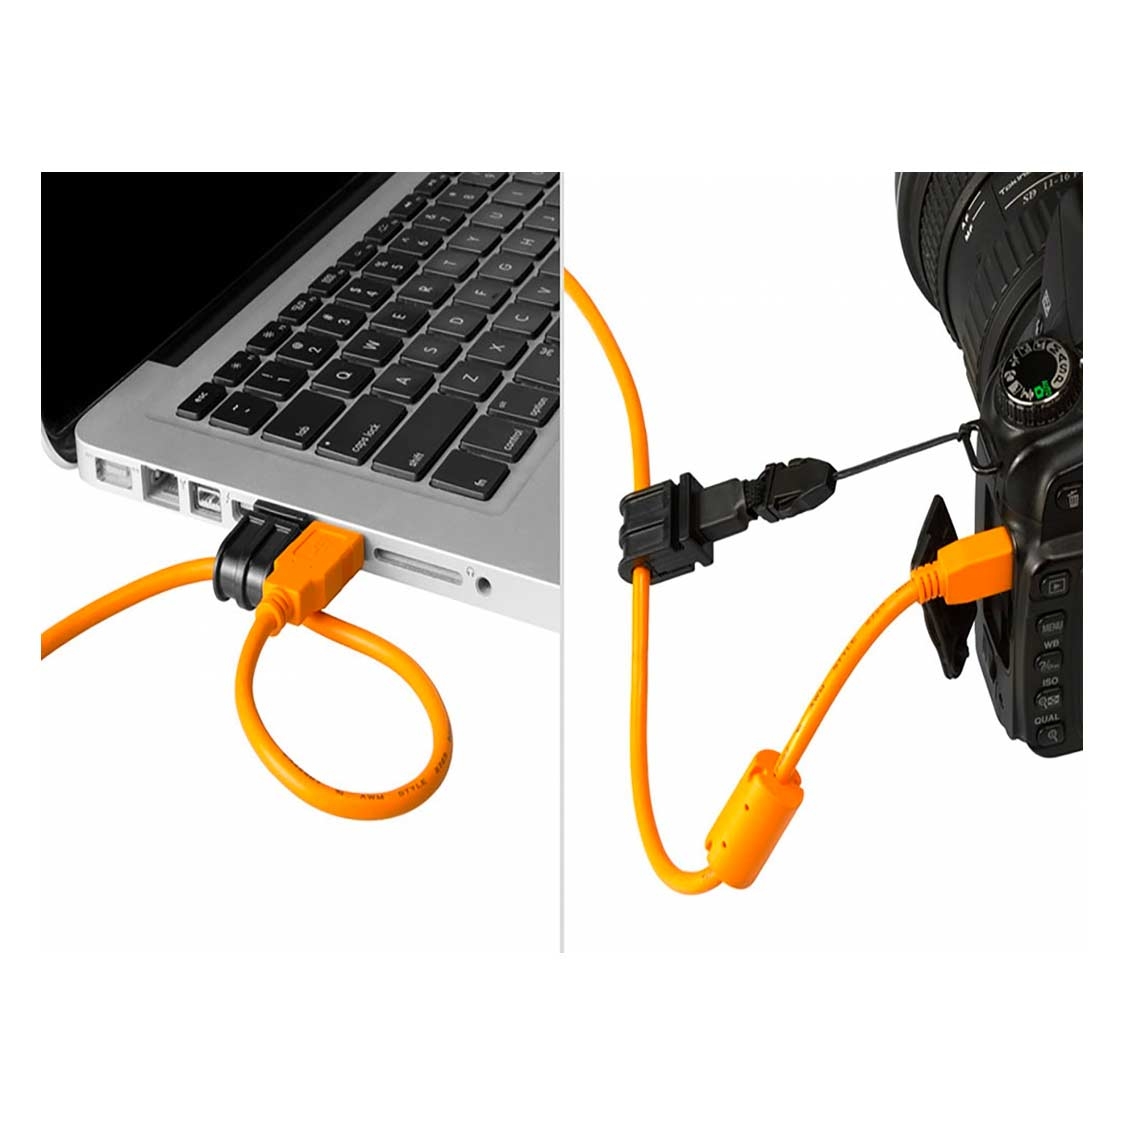 Tether Tools JerkStopper Tethering Kit Camera Support and USB Support